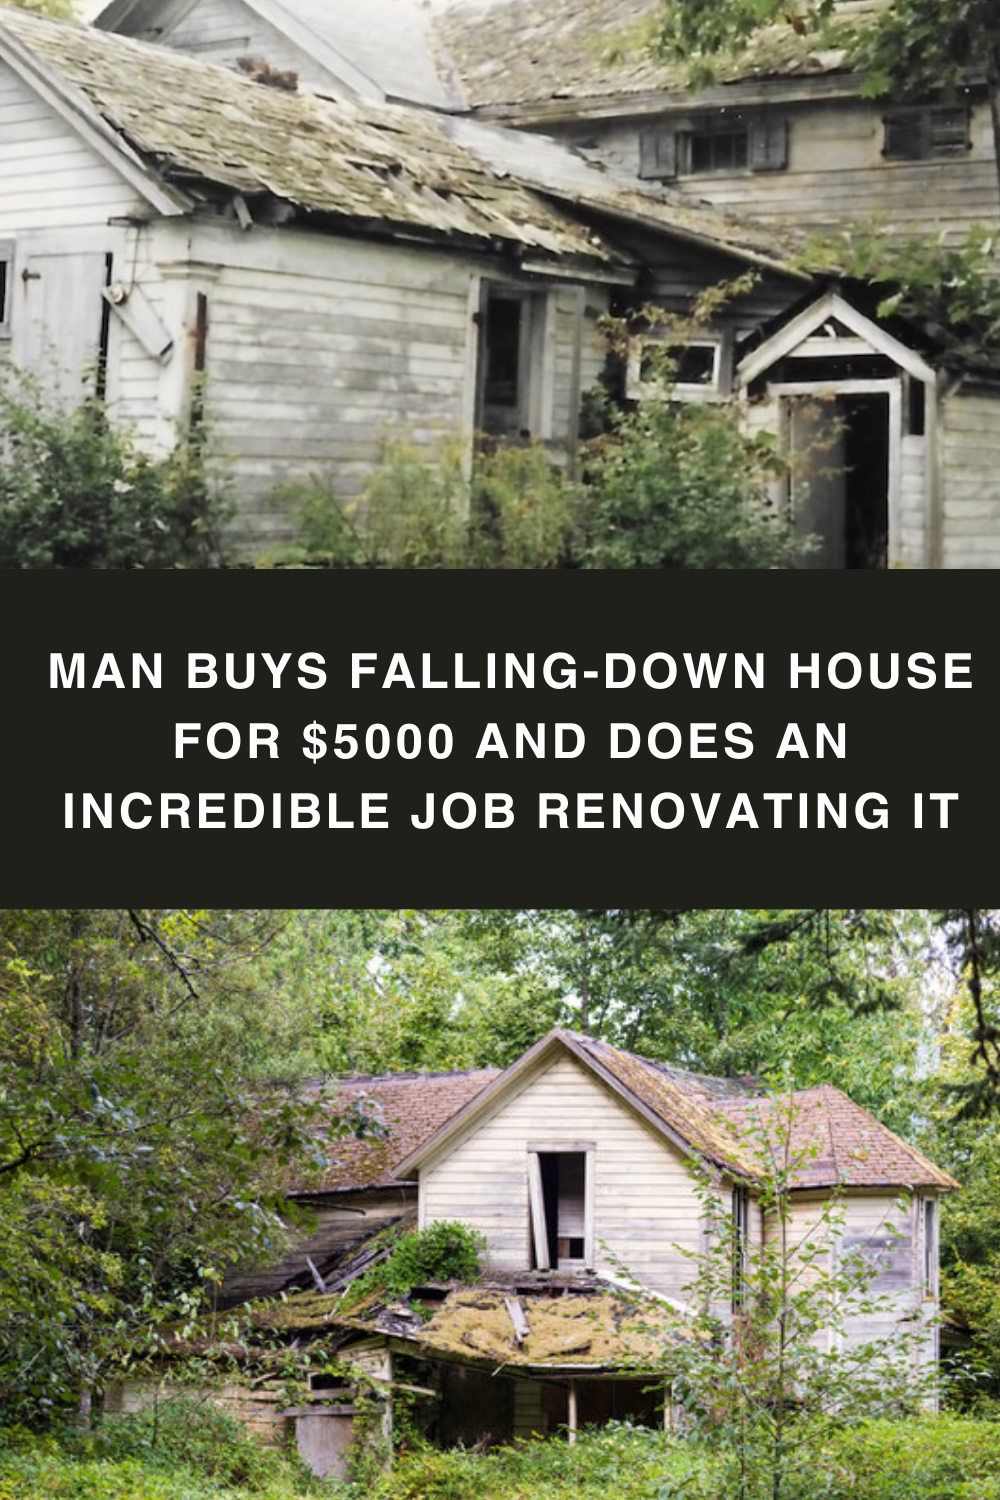 Man buys falling-down house for $5000 and does incredible job renovating it pin